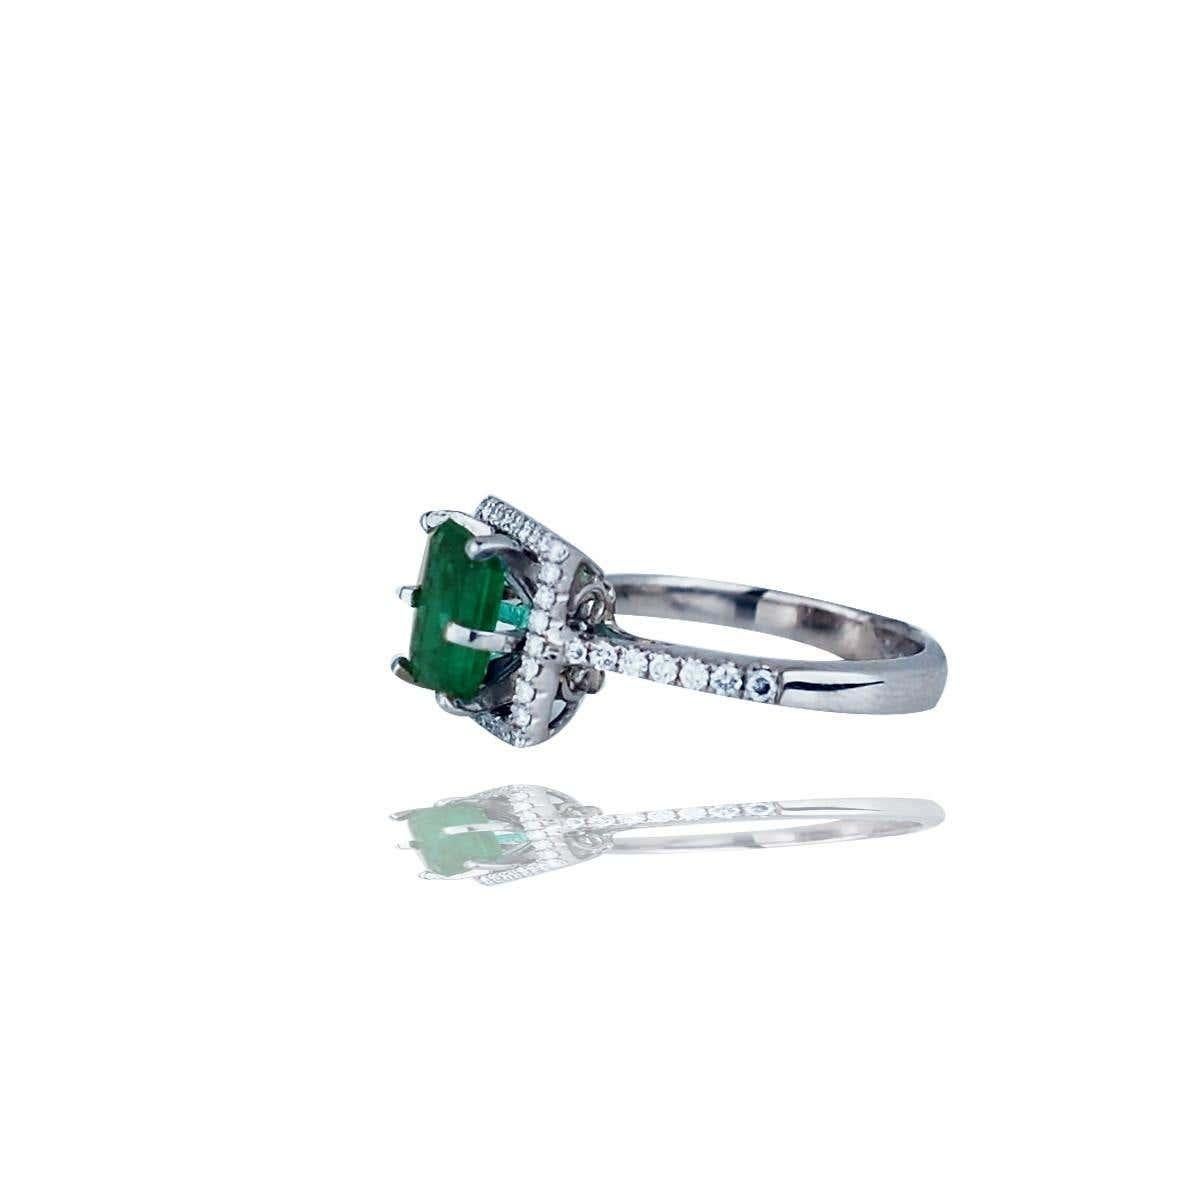 Stunning, Colombian Emerald set in Halo Diamond Ring, 2.48 TCW
6.20-7.10 x 5.30 mm Emerald Cut Colombian Emerald is approximately 1.95 carat.
The rings diamonds are on the shank and halo and measure 1.3 mm each with a total weight of estimated .48